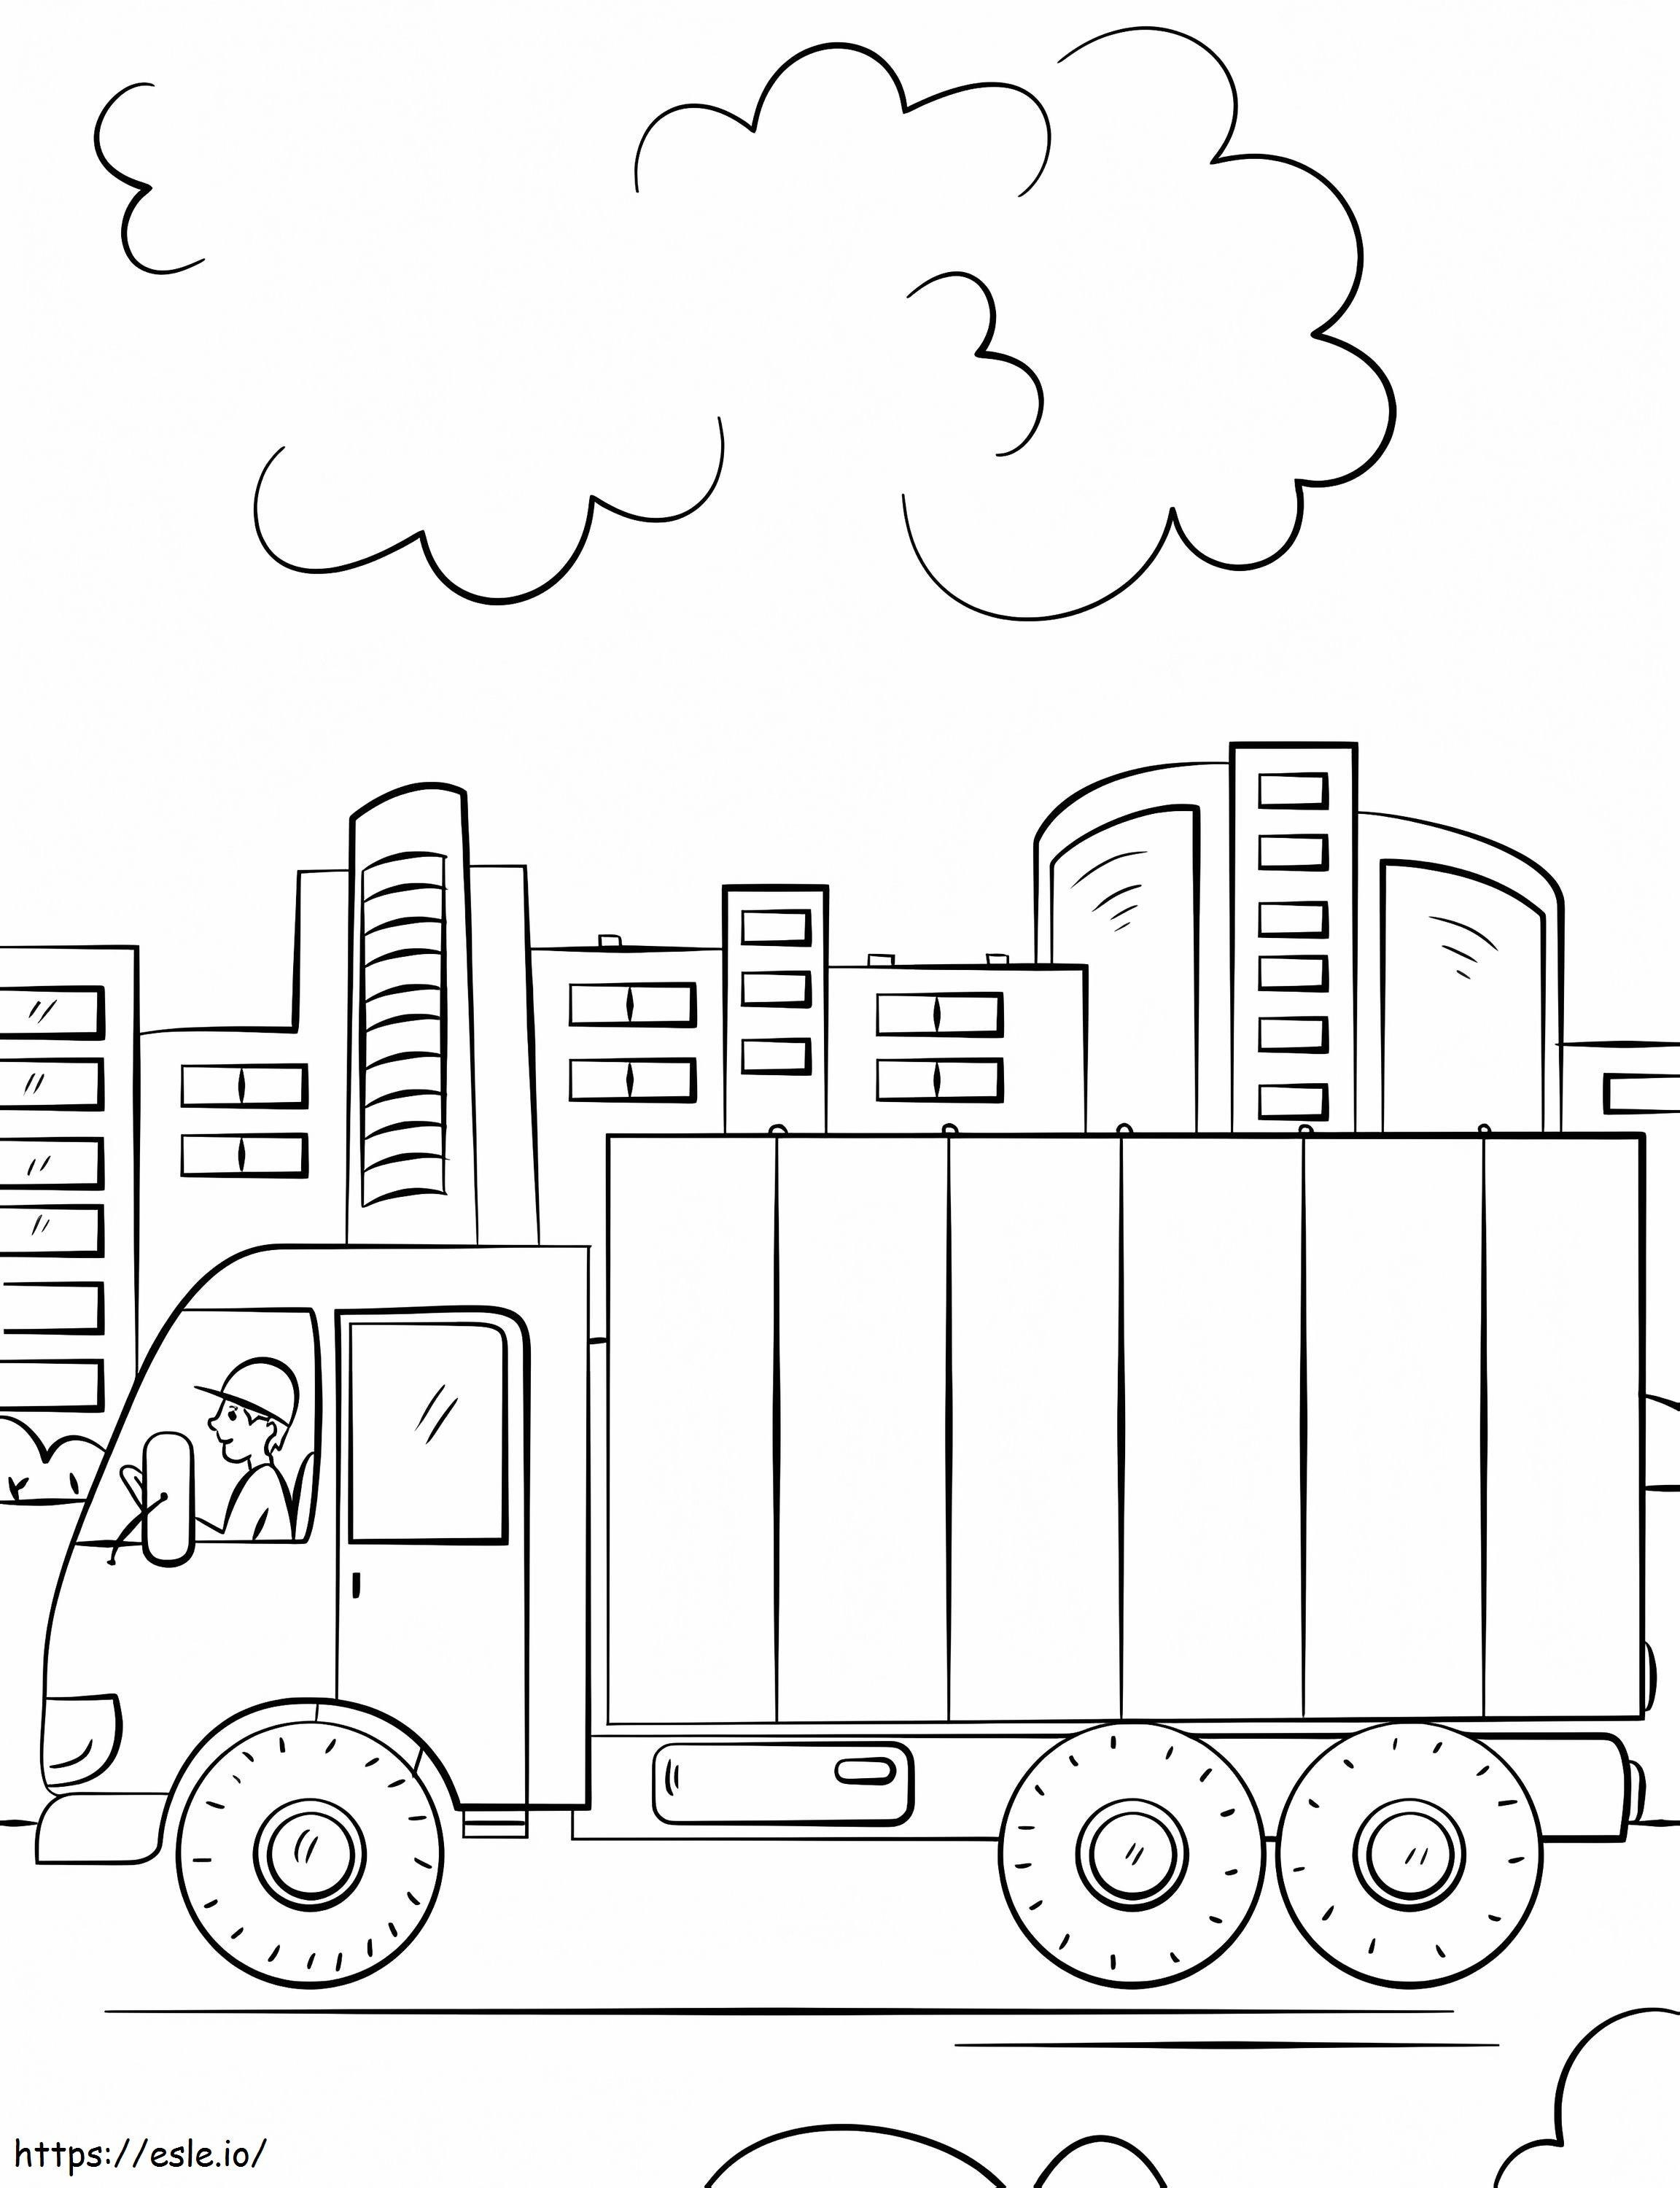 Delivery Truck coloring page